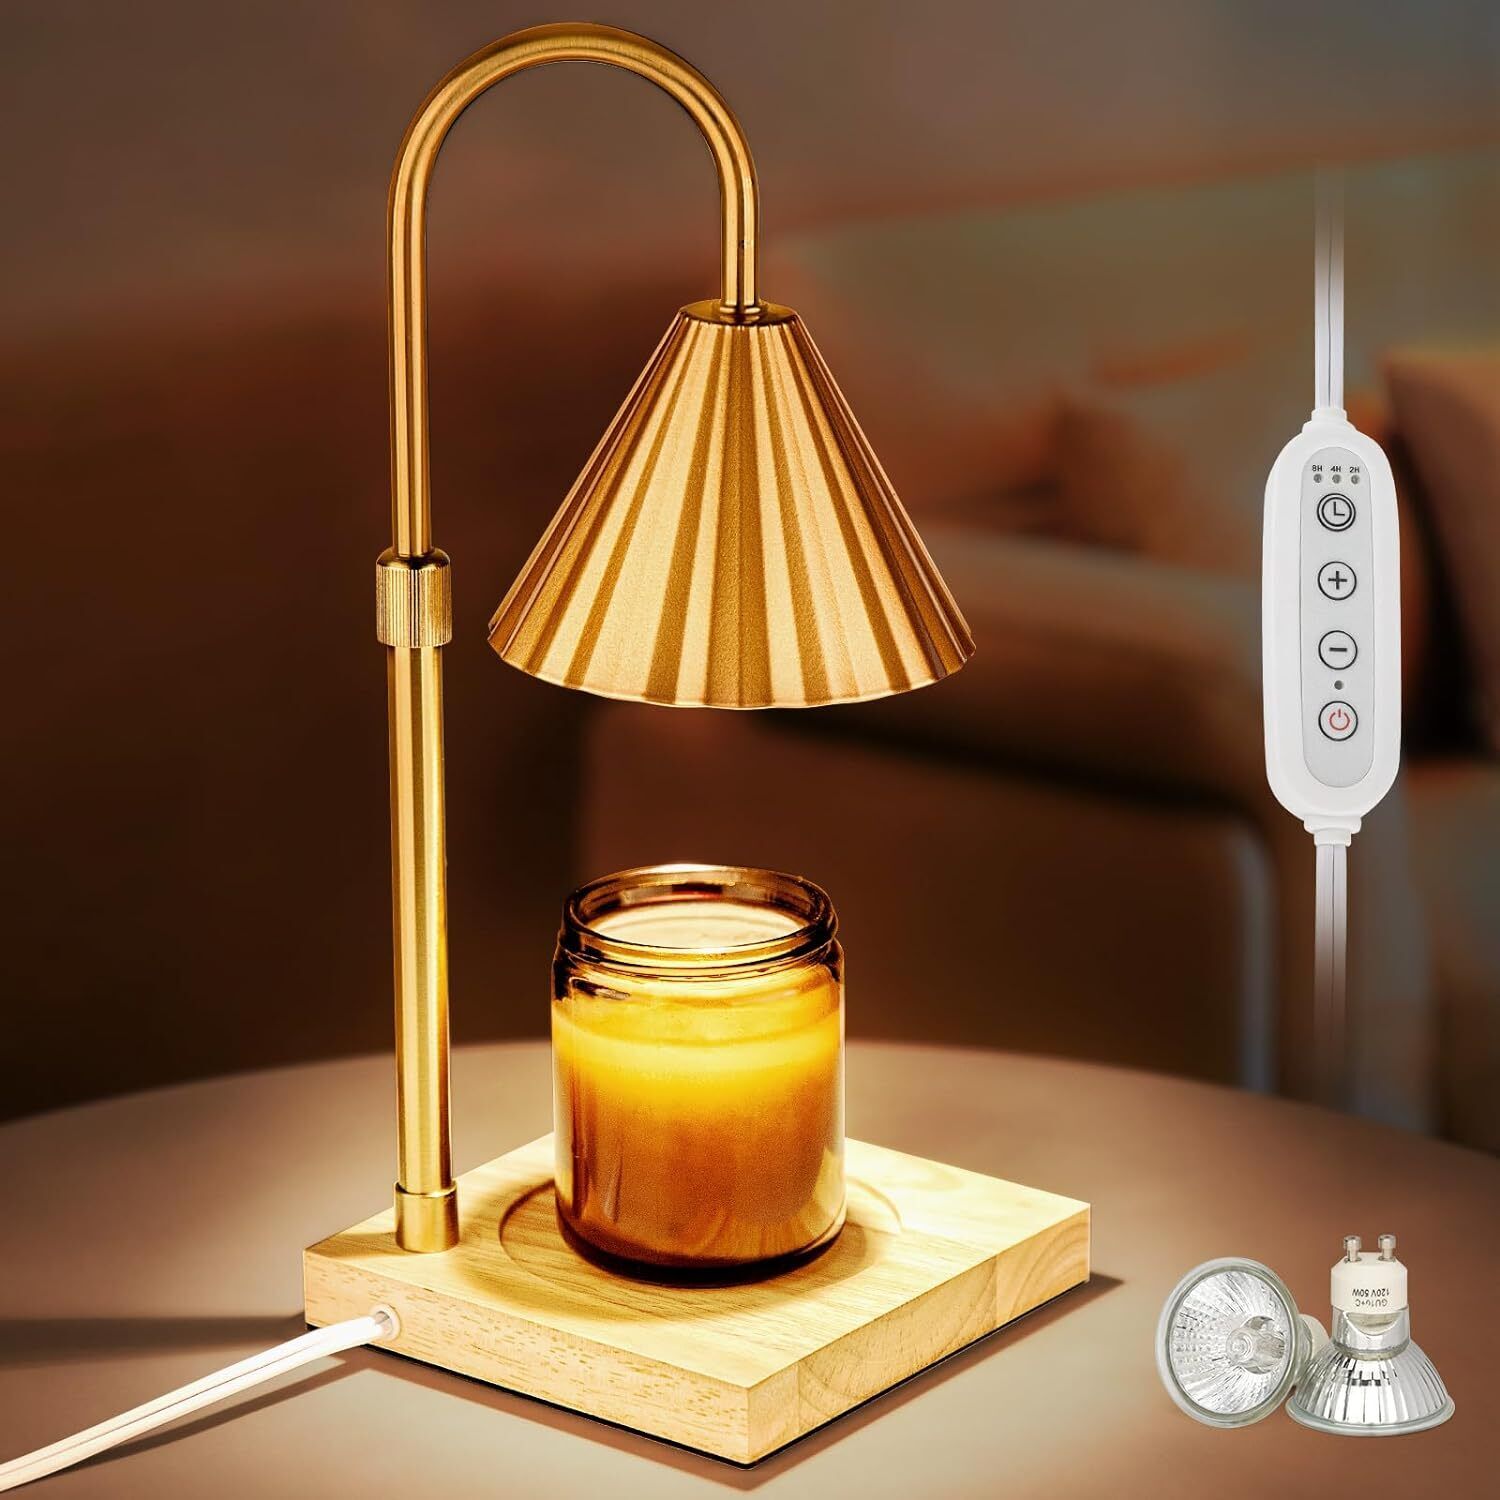 Candle Warmer Lamp Electric Candle Lamp Warmer Gift for Mom Bedroom Home Decor